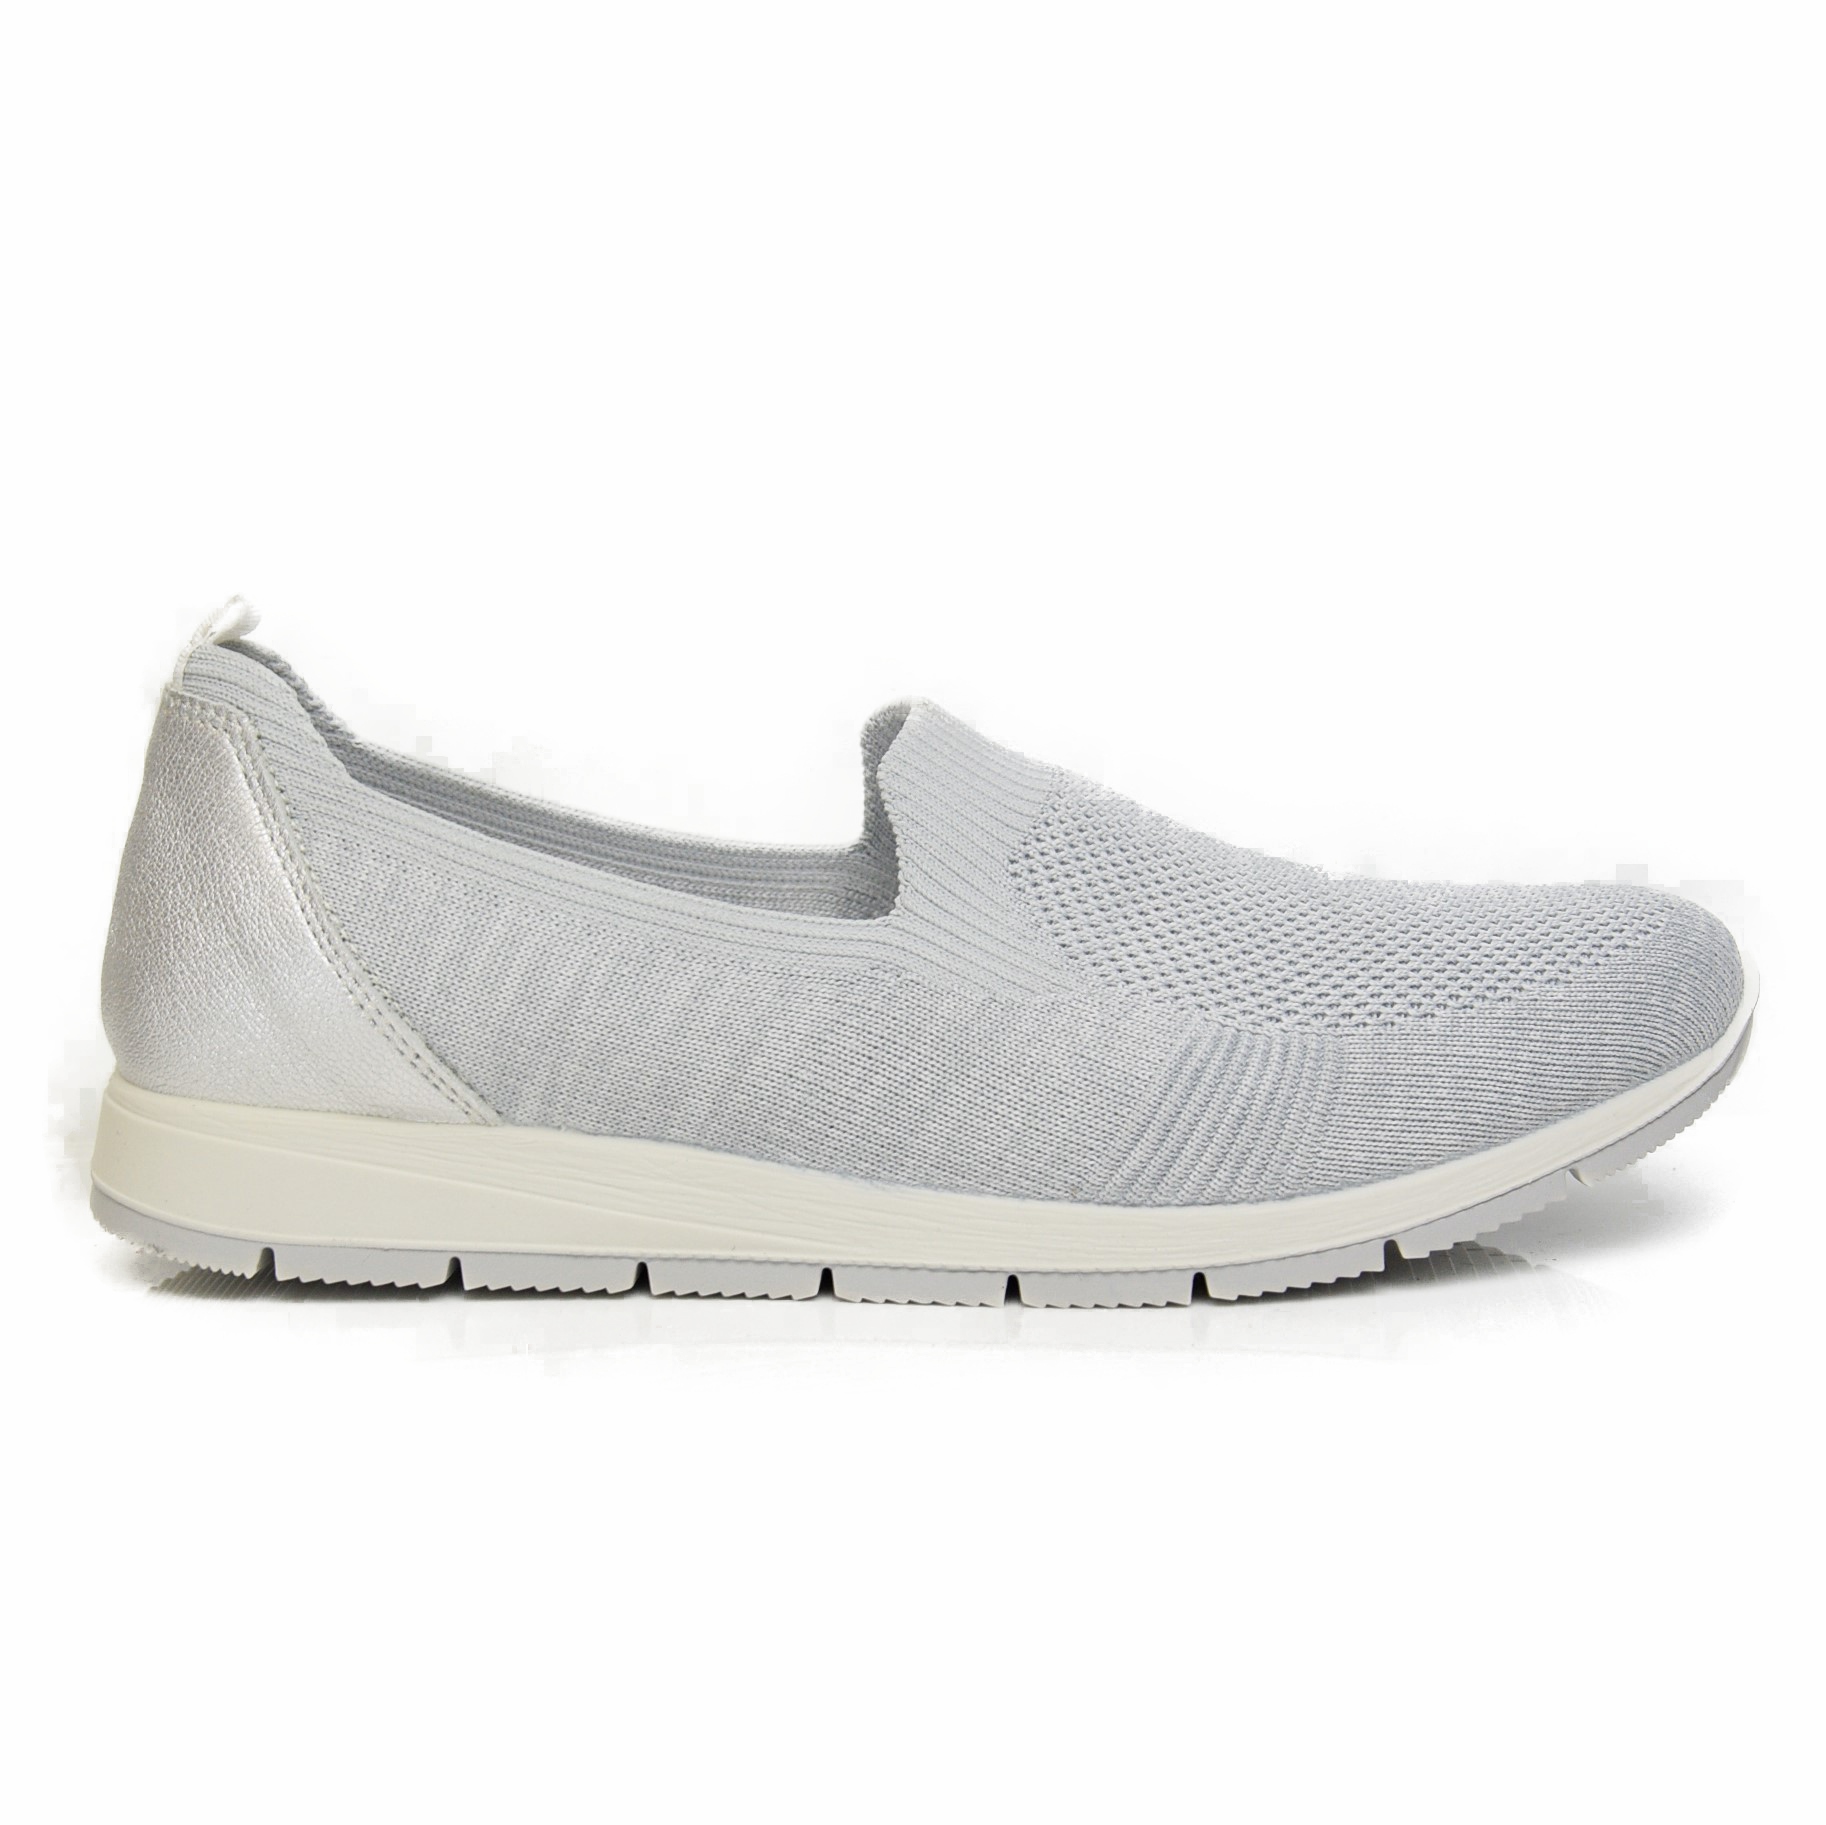 ENVAL SOFT WOMEN'S SPORTY SHOES EXTRA COMFORT WIDE FIT | SanitariaWeb